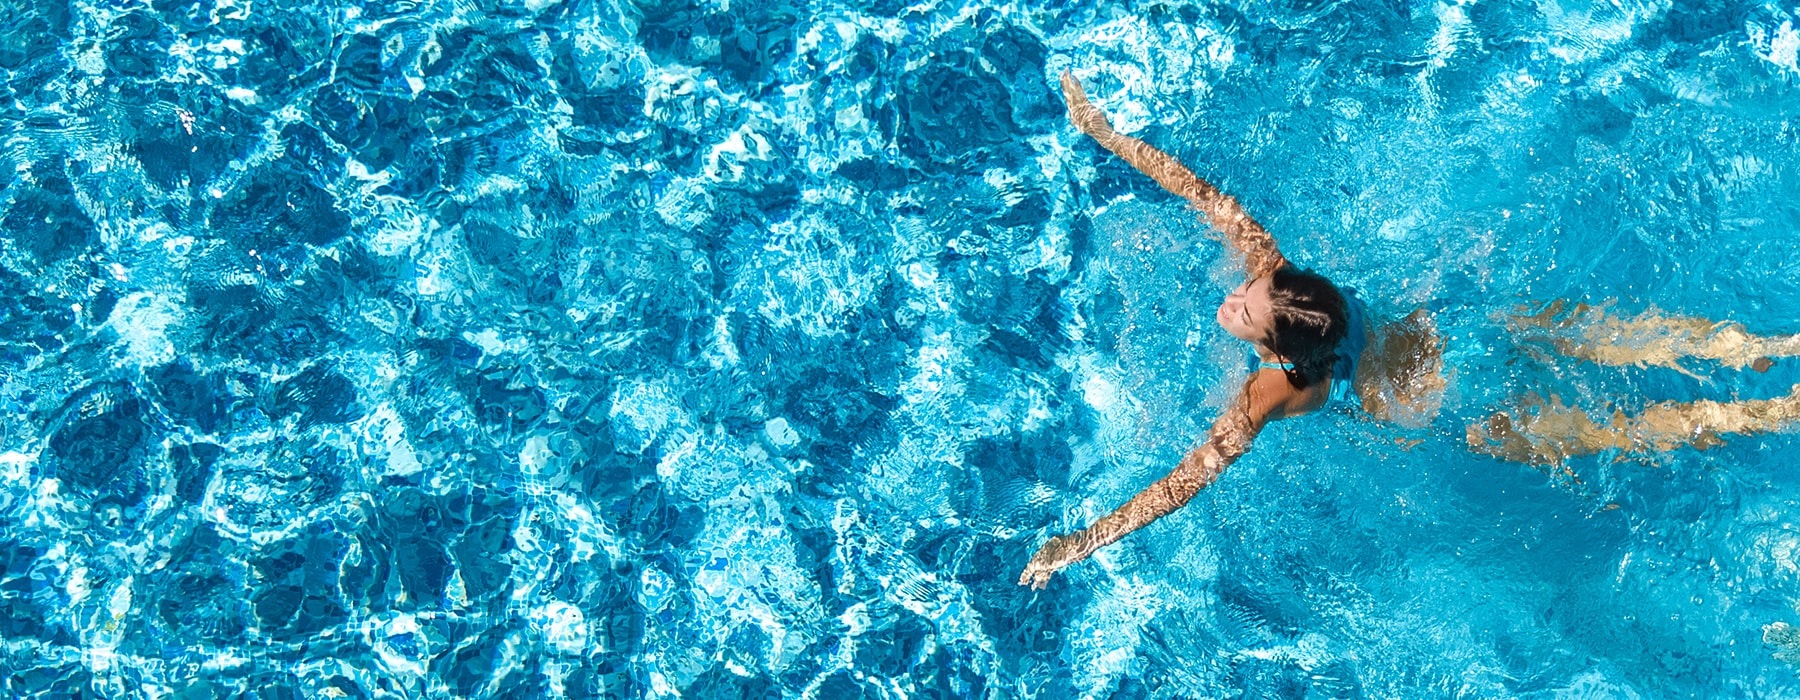 lifestyle image of a woman swimming in a large pool